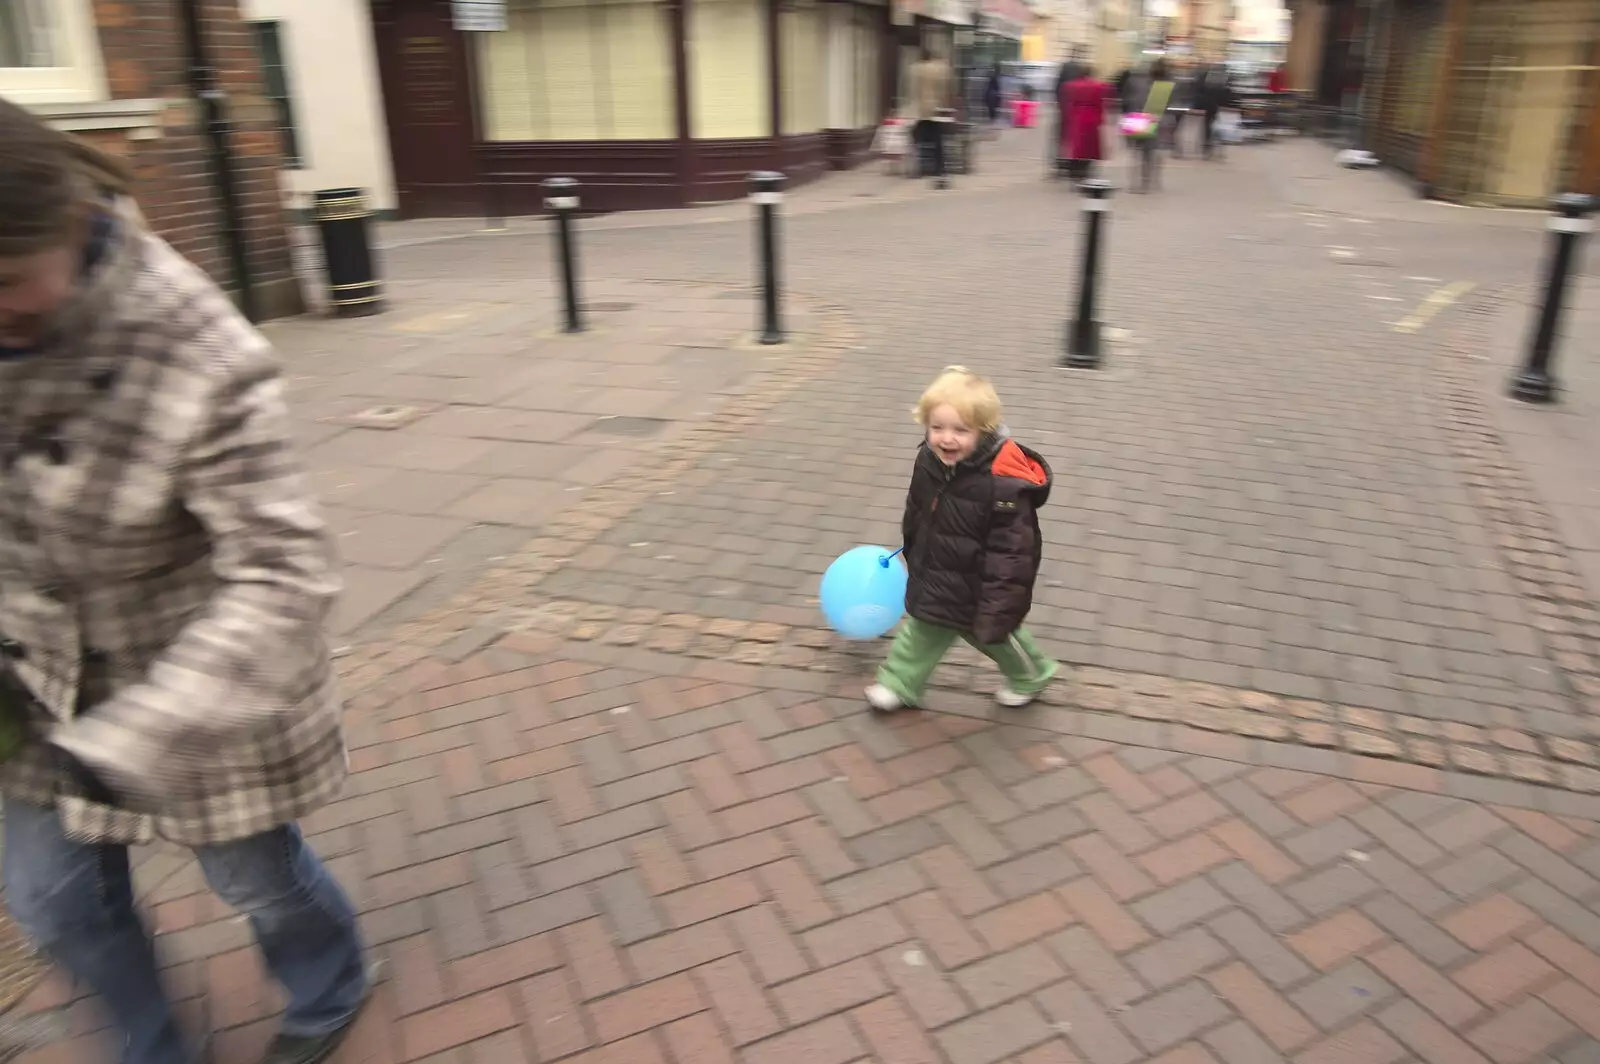 Fred chases Isobel with a balloon on a stick, from Pizza in Bury St. Edmunds, Suffolk - 30th January 2011